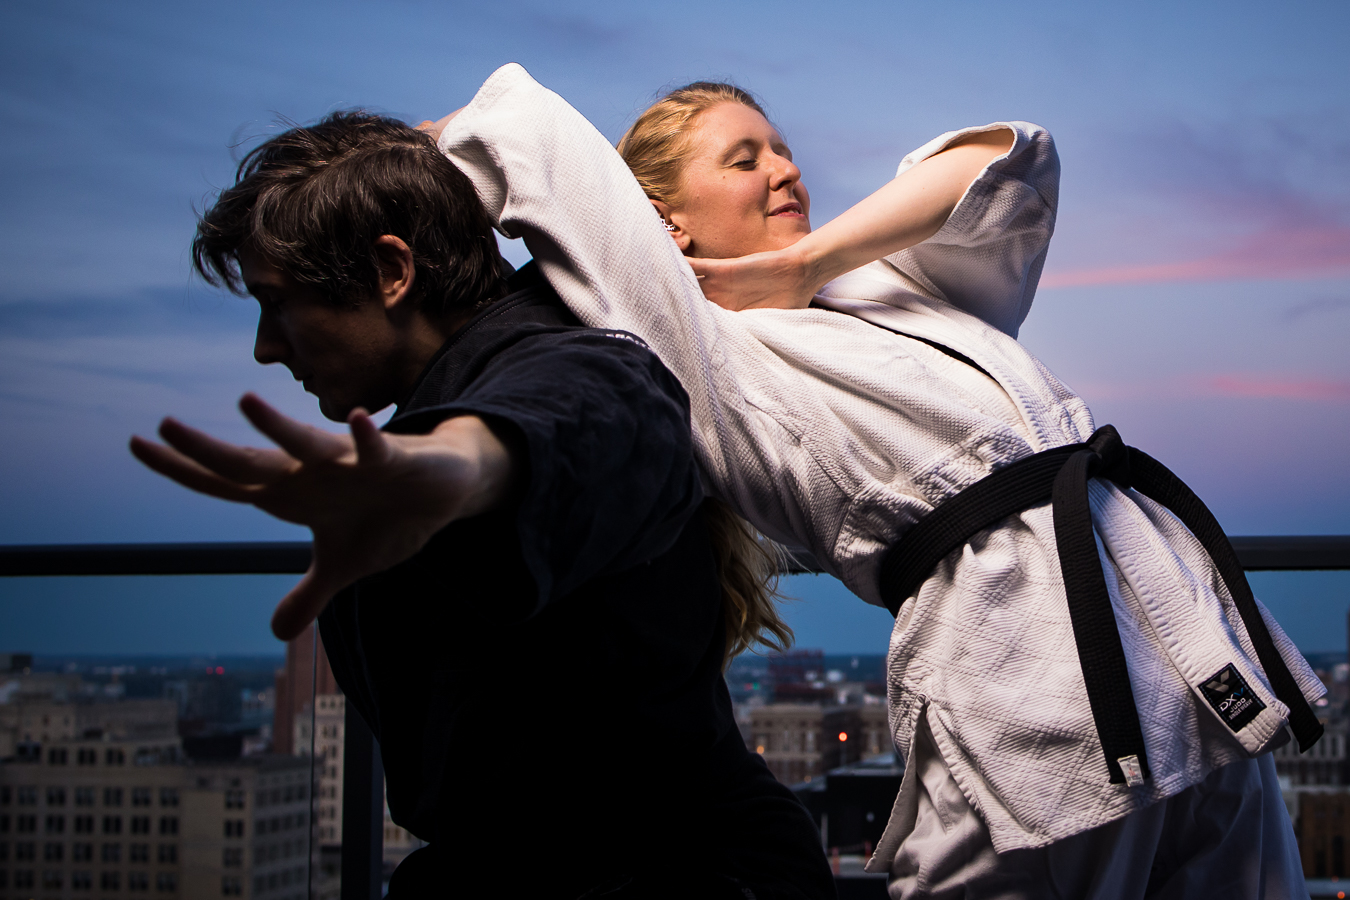 jiu-jitsu engagement photographer, lisa rhinehart, captures this fun, creative image of the couple as they do jiu-jitsu together on the rooftop of their apartment while the sun sets behind them 